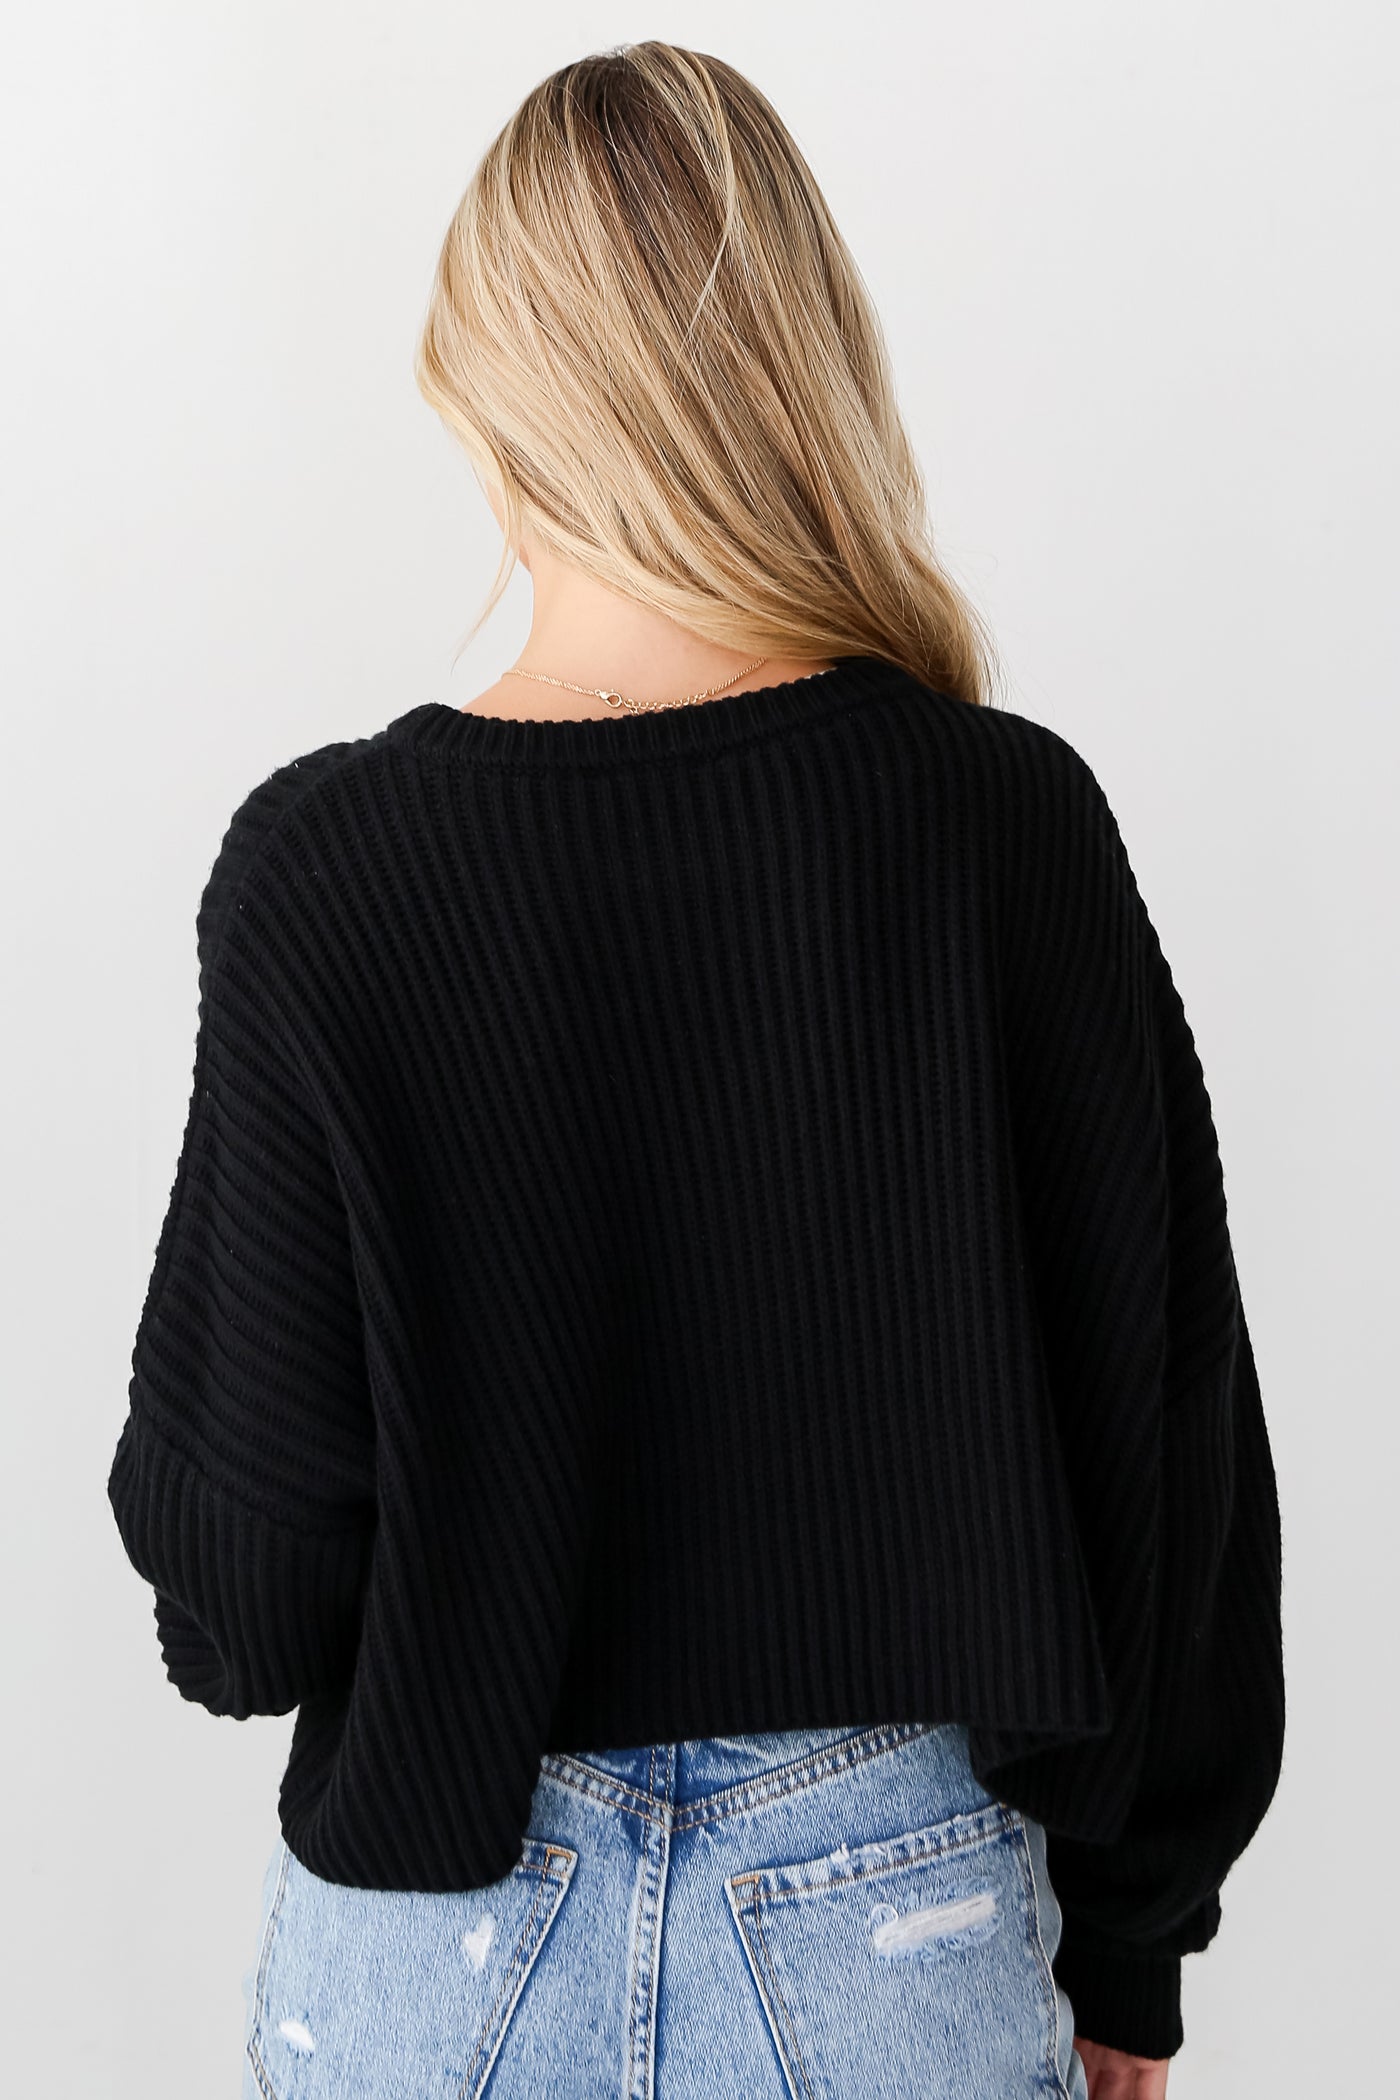 Black Sweater back view